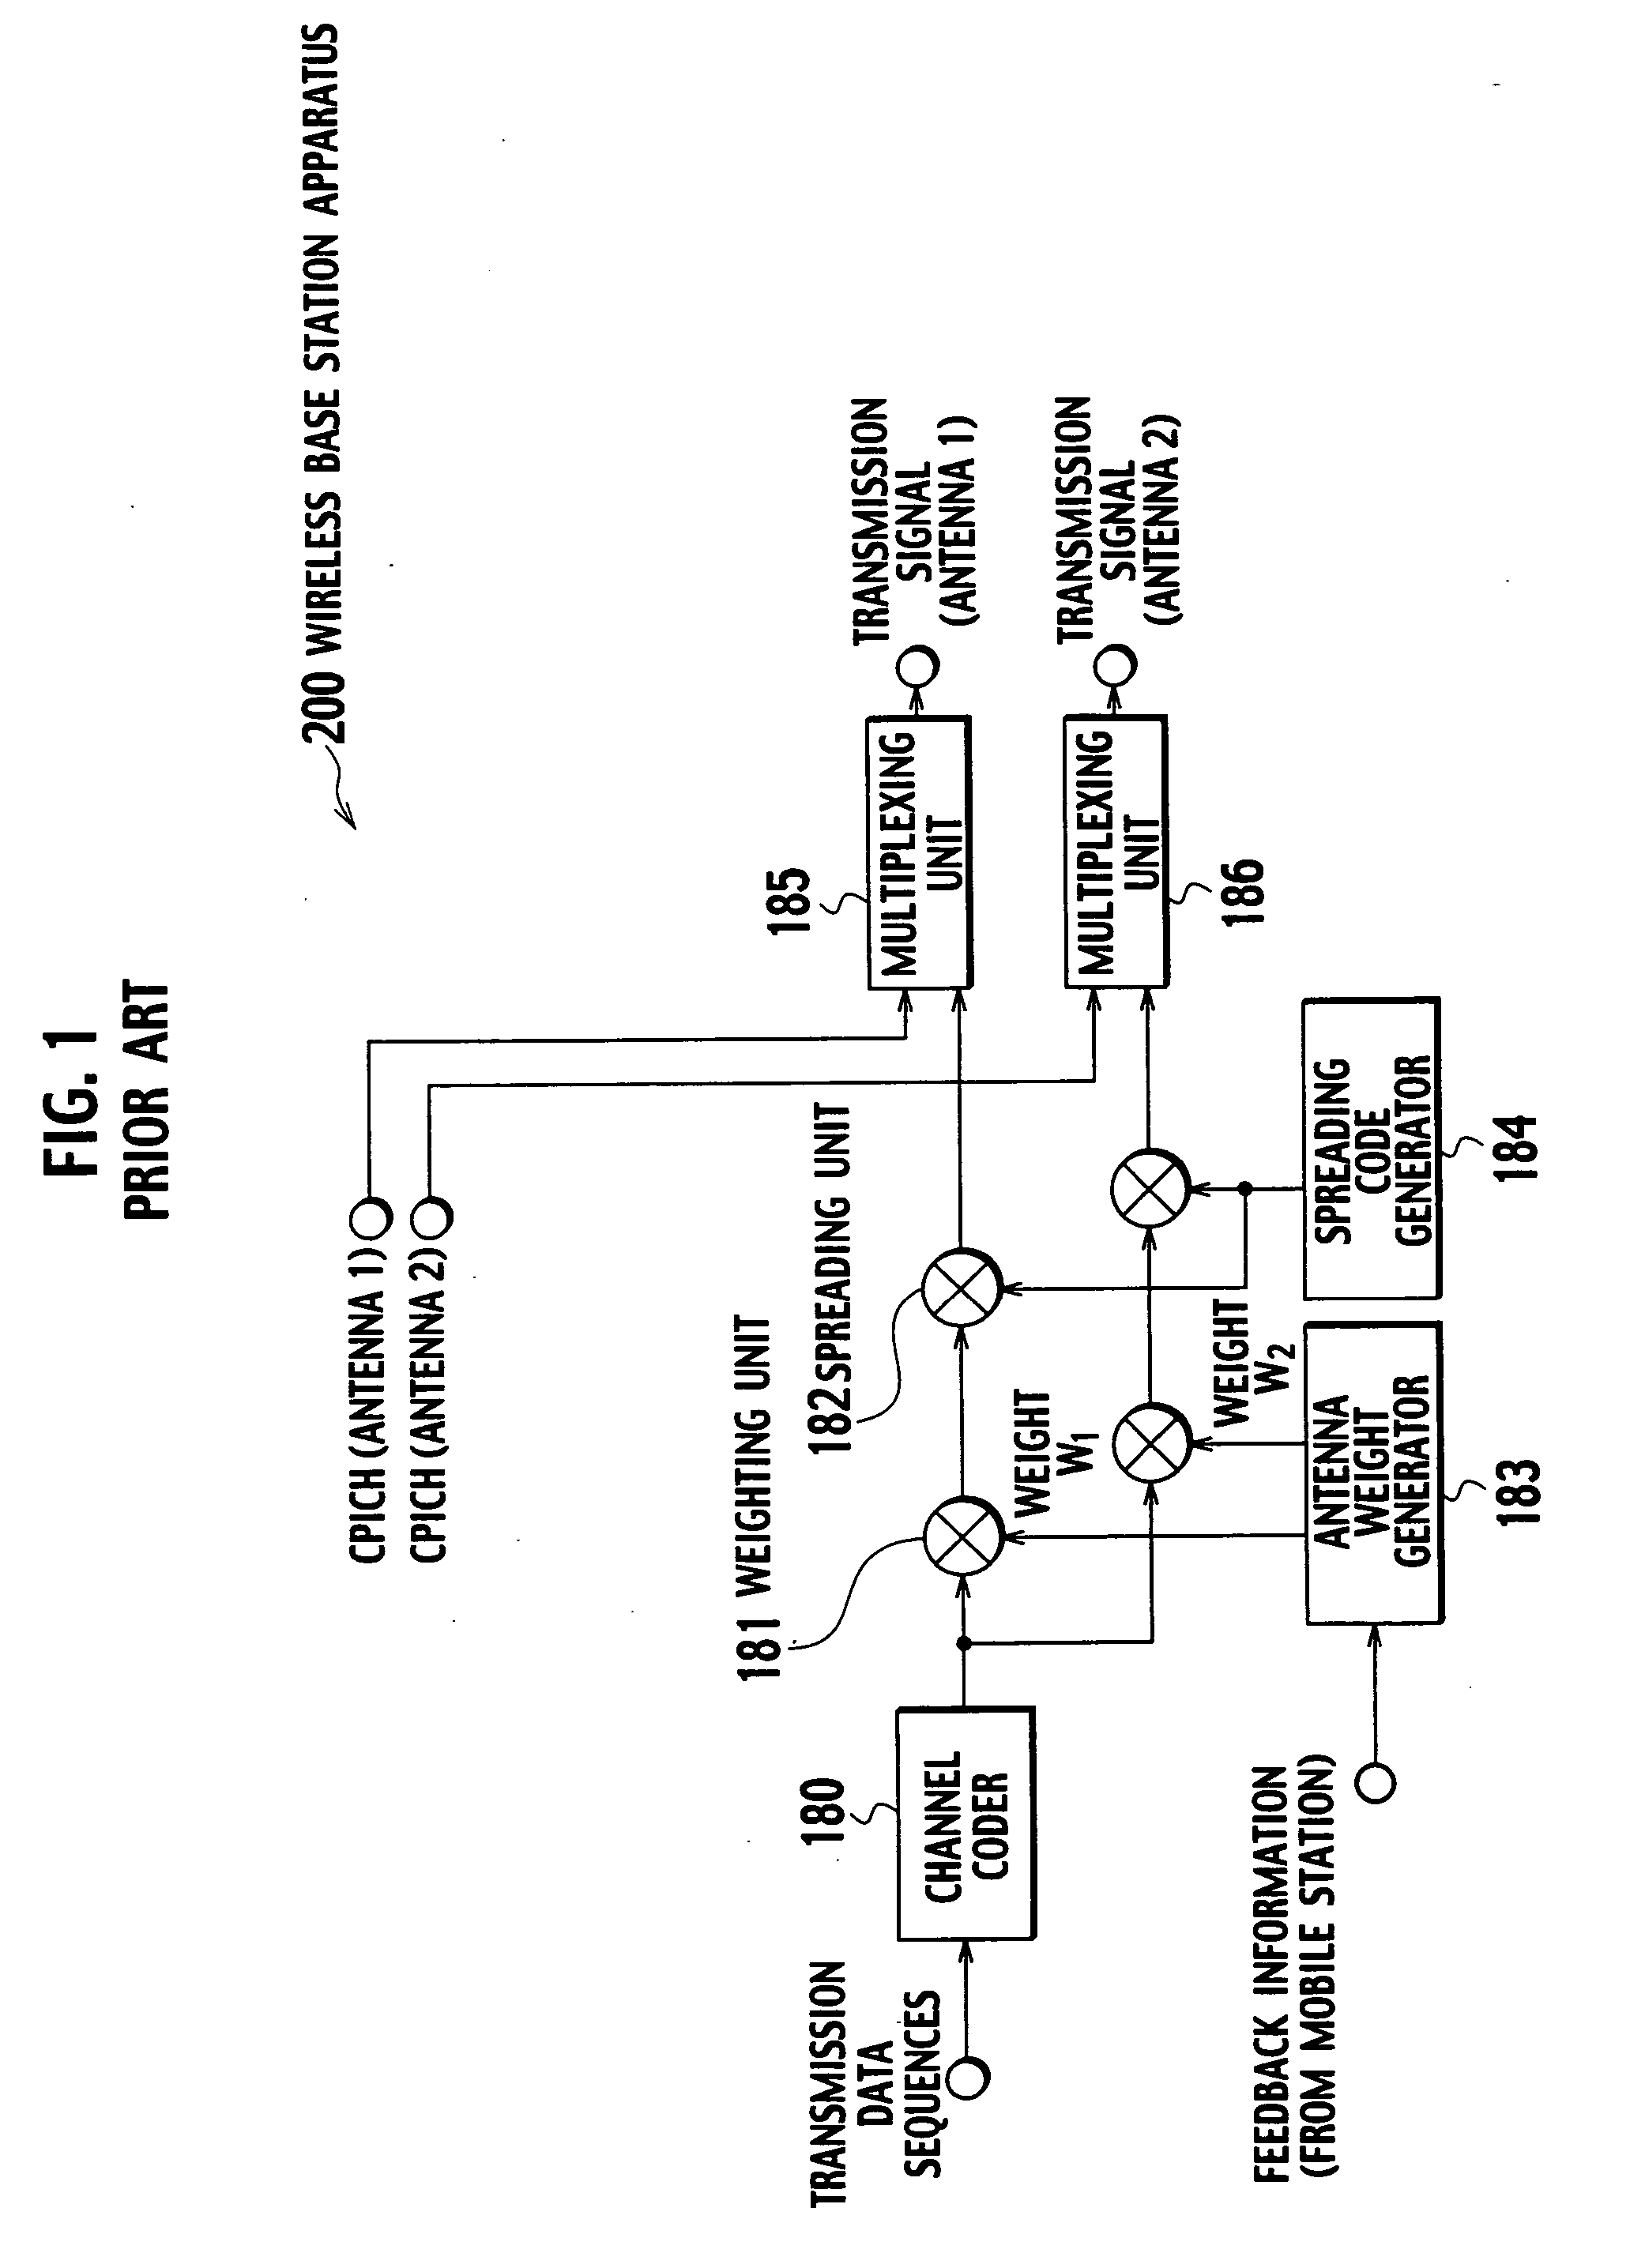 Mobile station apparatus and control method for the mobile station apparatus